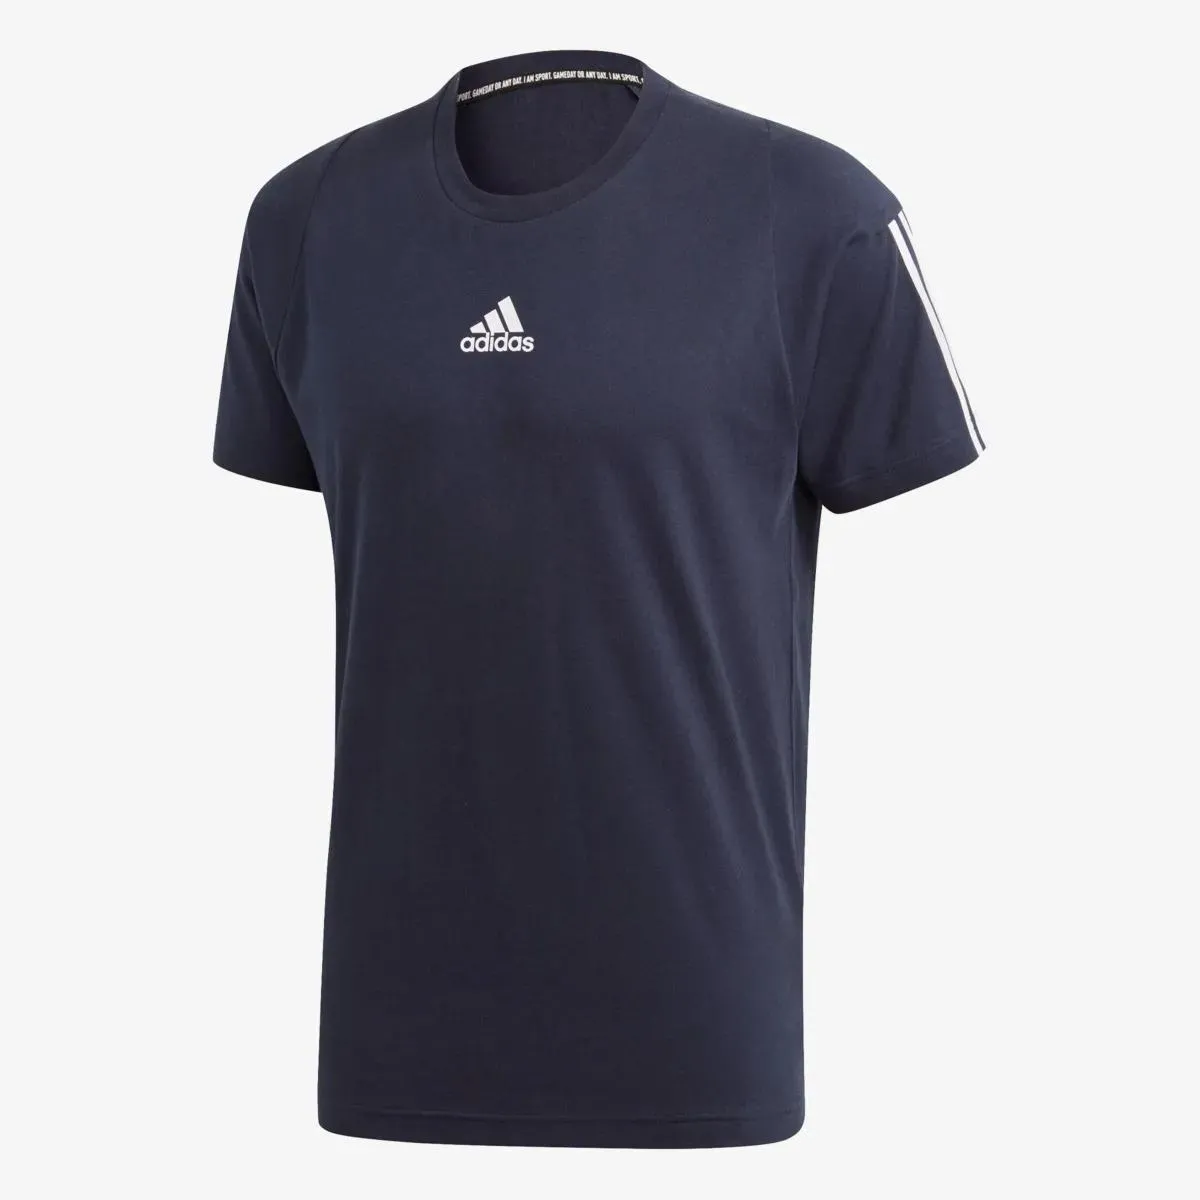 adidas T-shirt MUST HAVES 3 STRIPES 